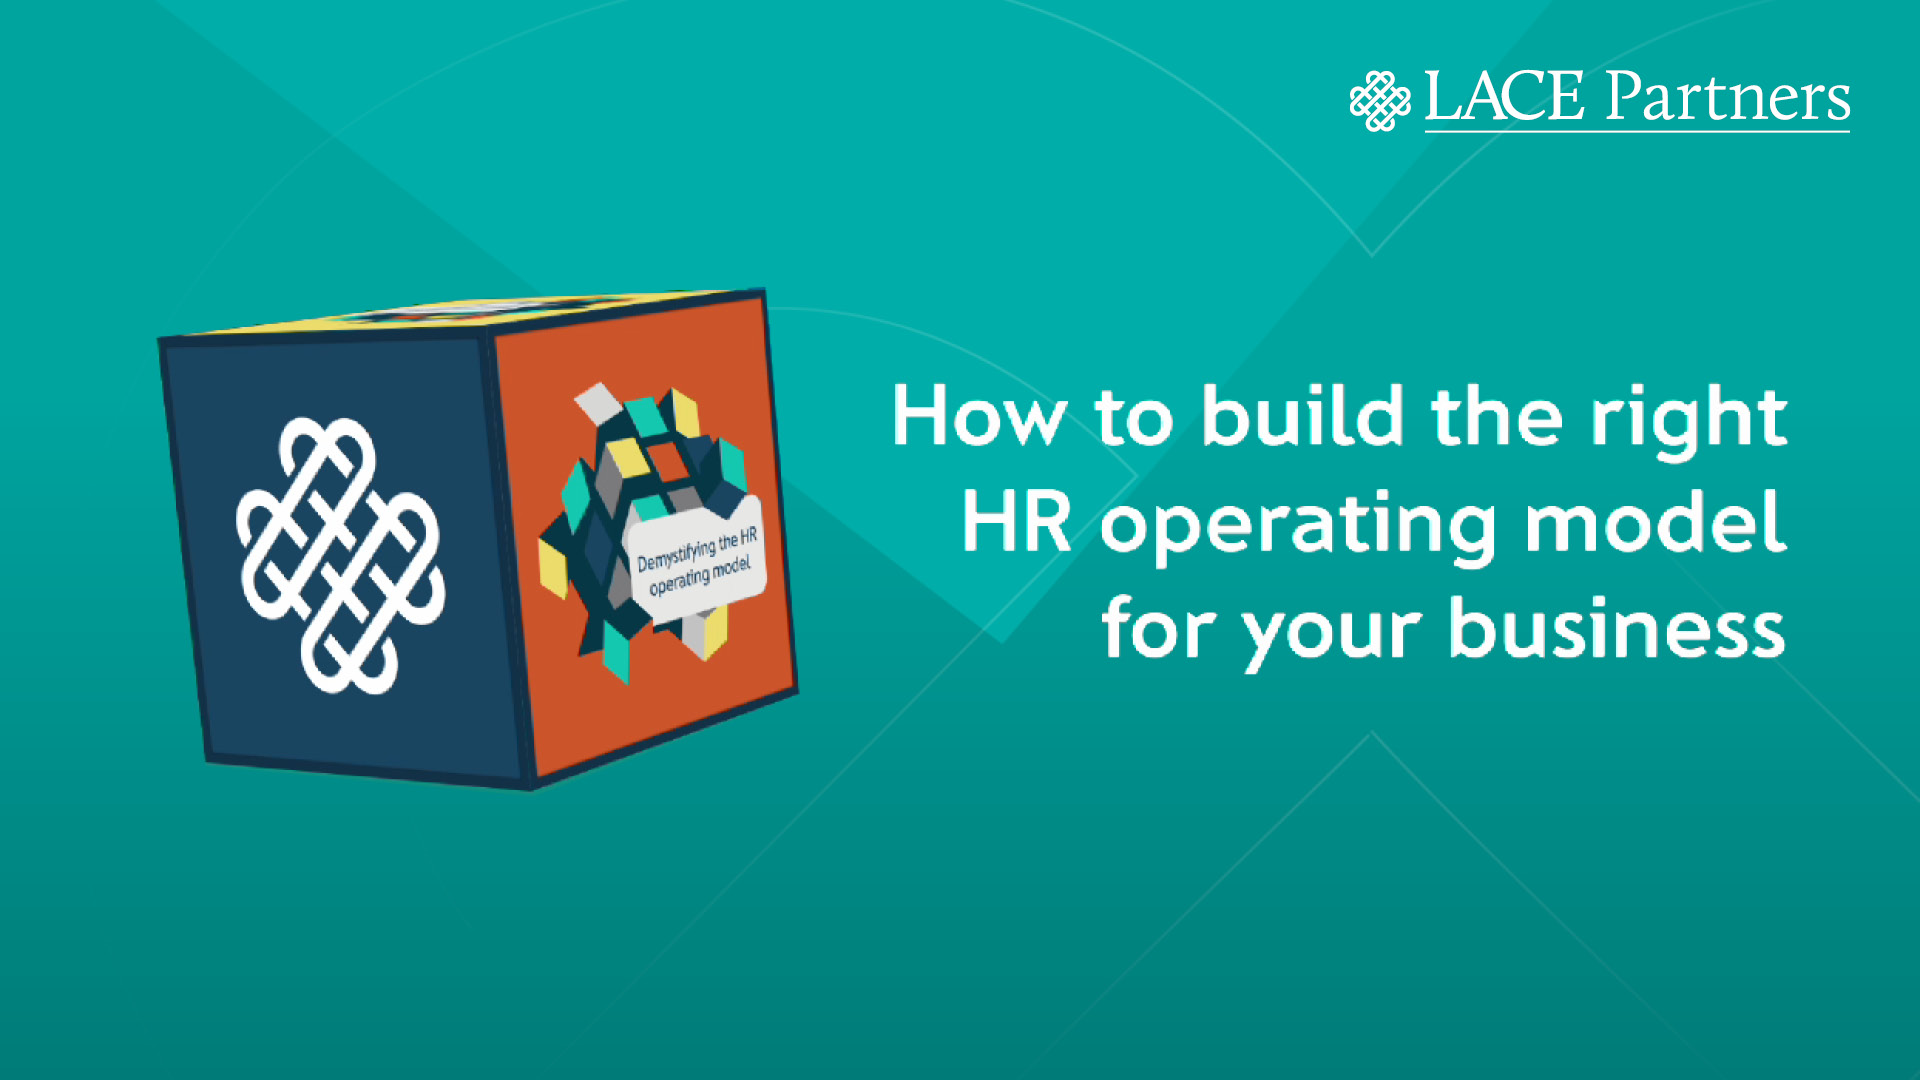 How to build your HR operating model and challenges